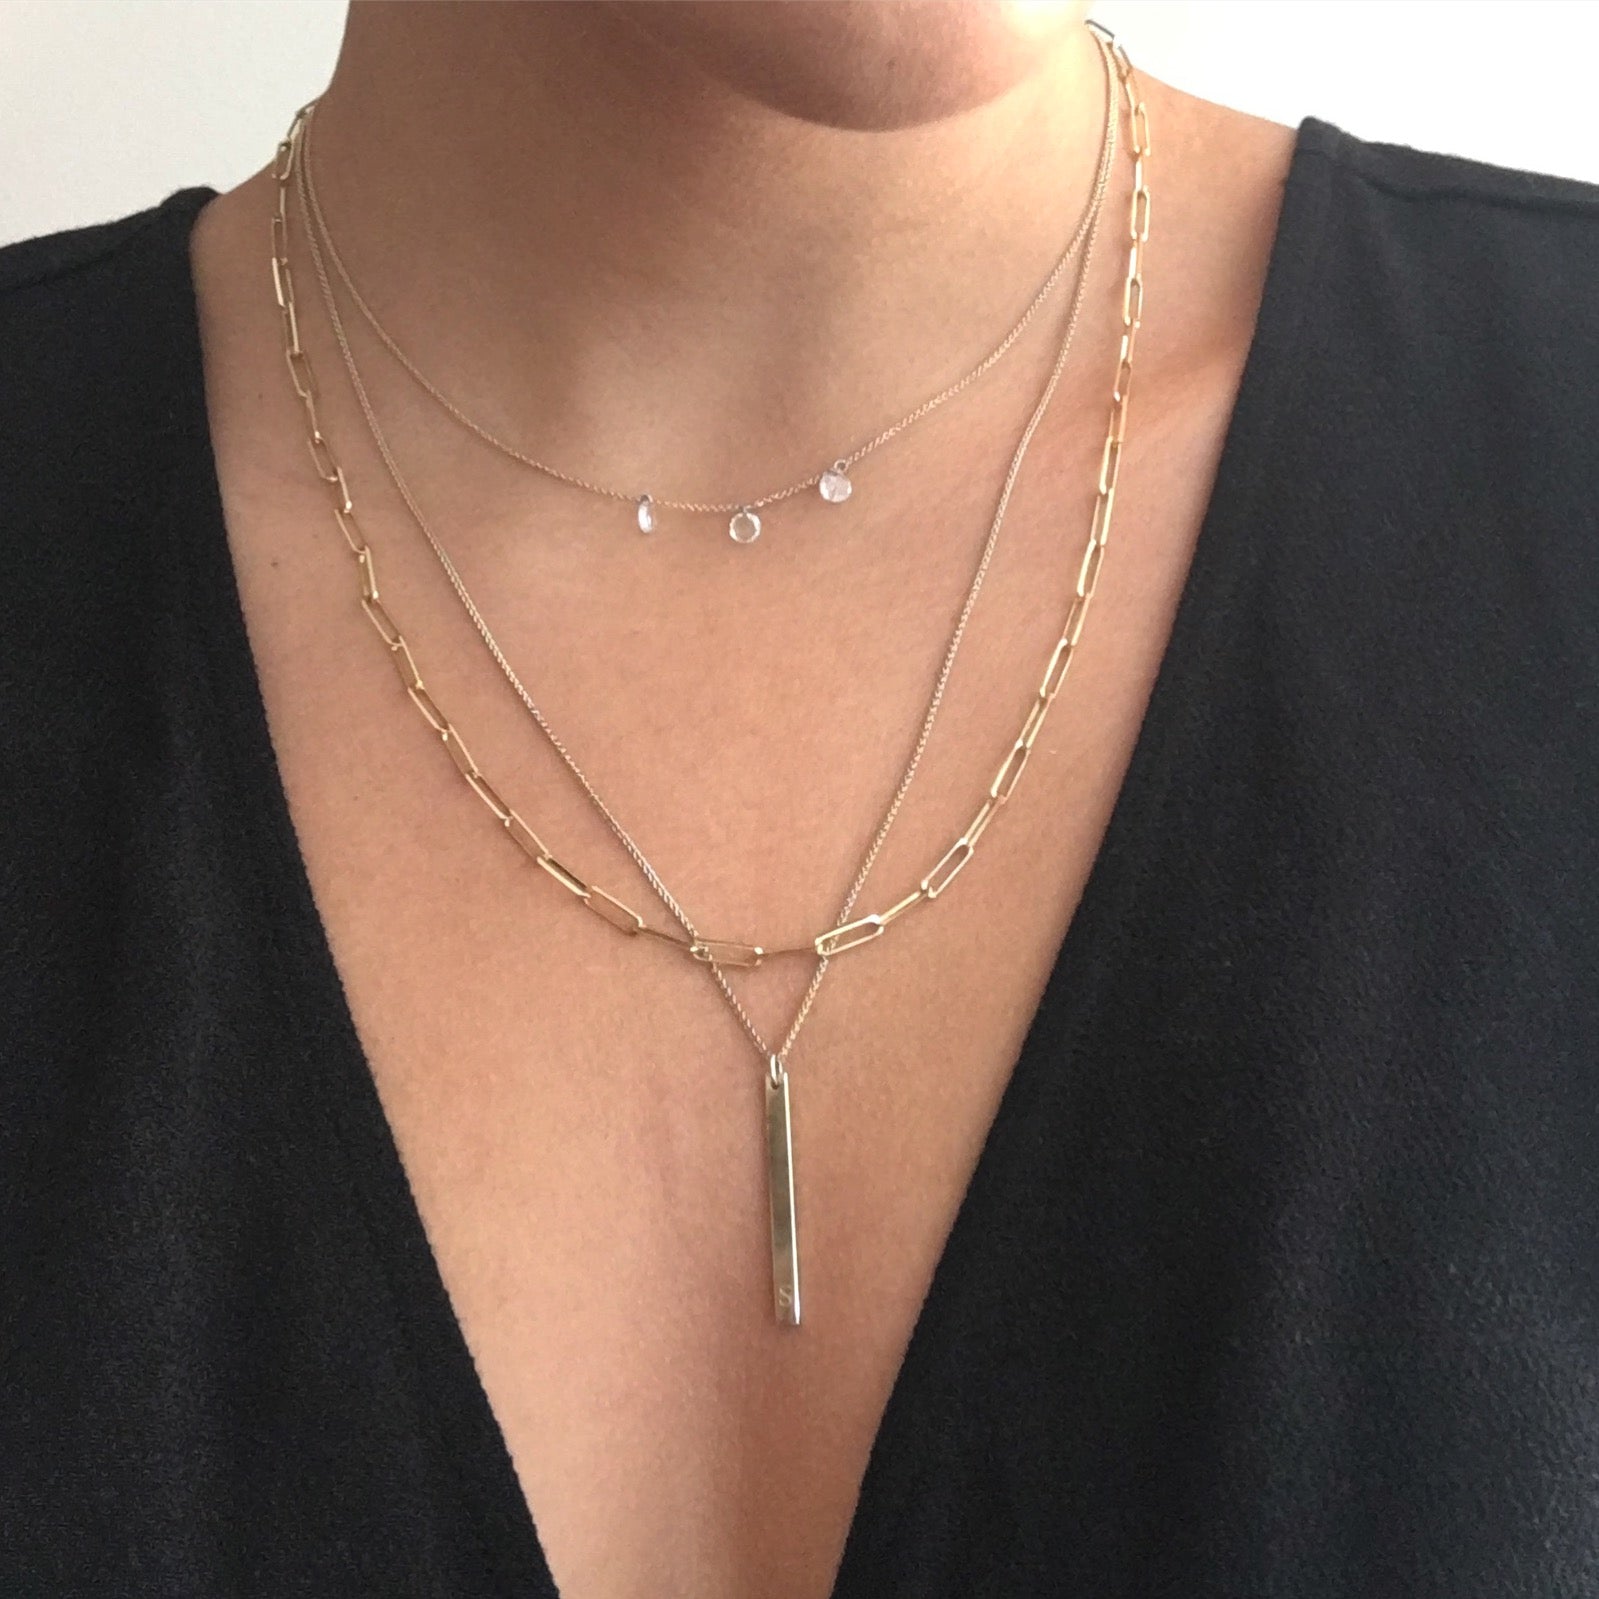 Selin Kent 14K Gaia Vertical Necklace with One White Diamond